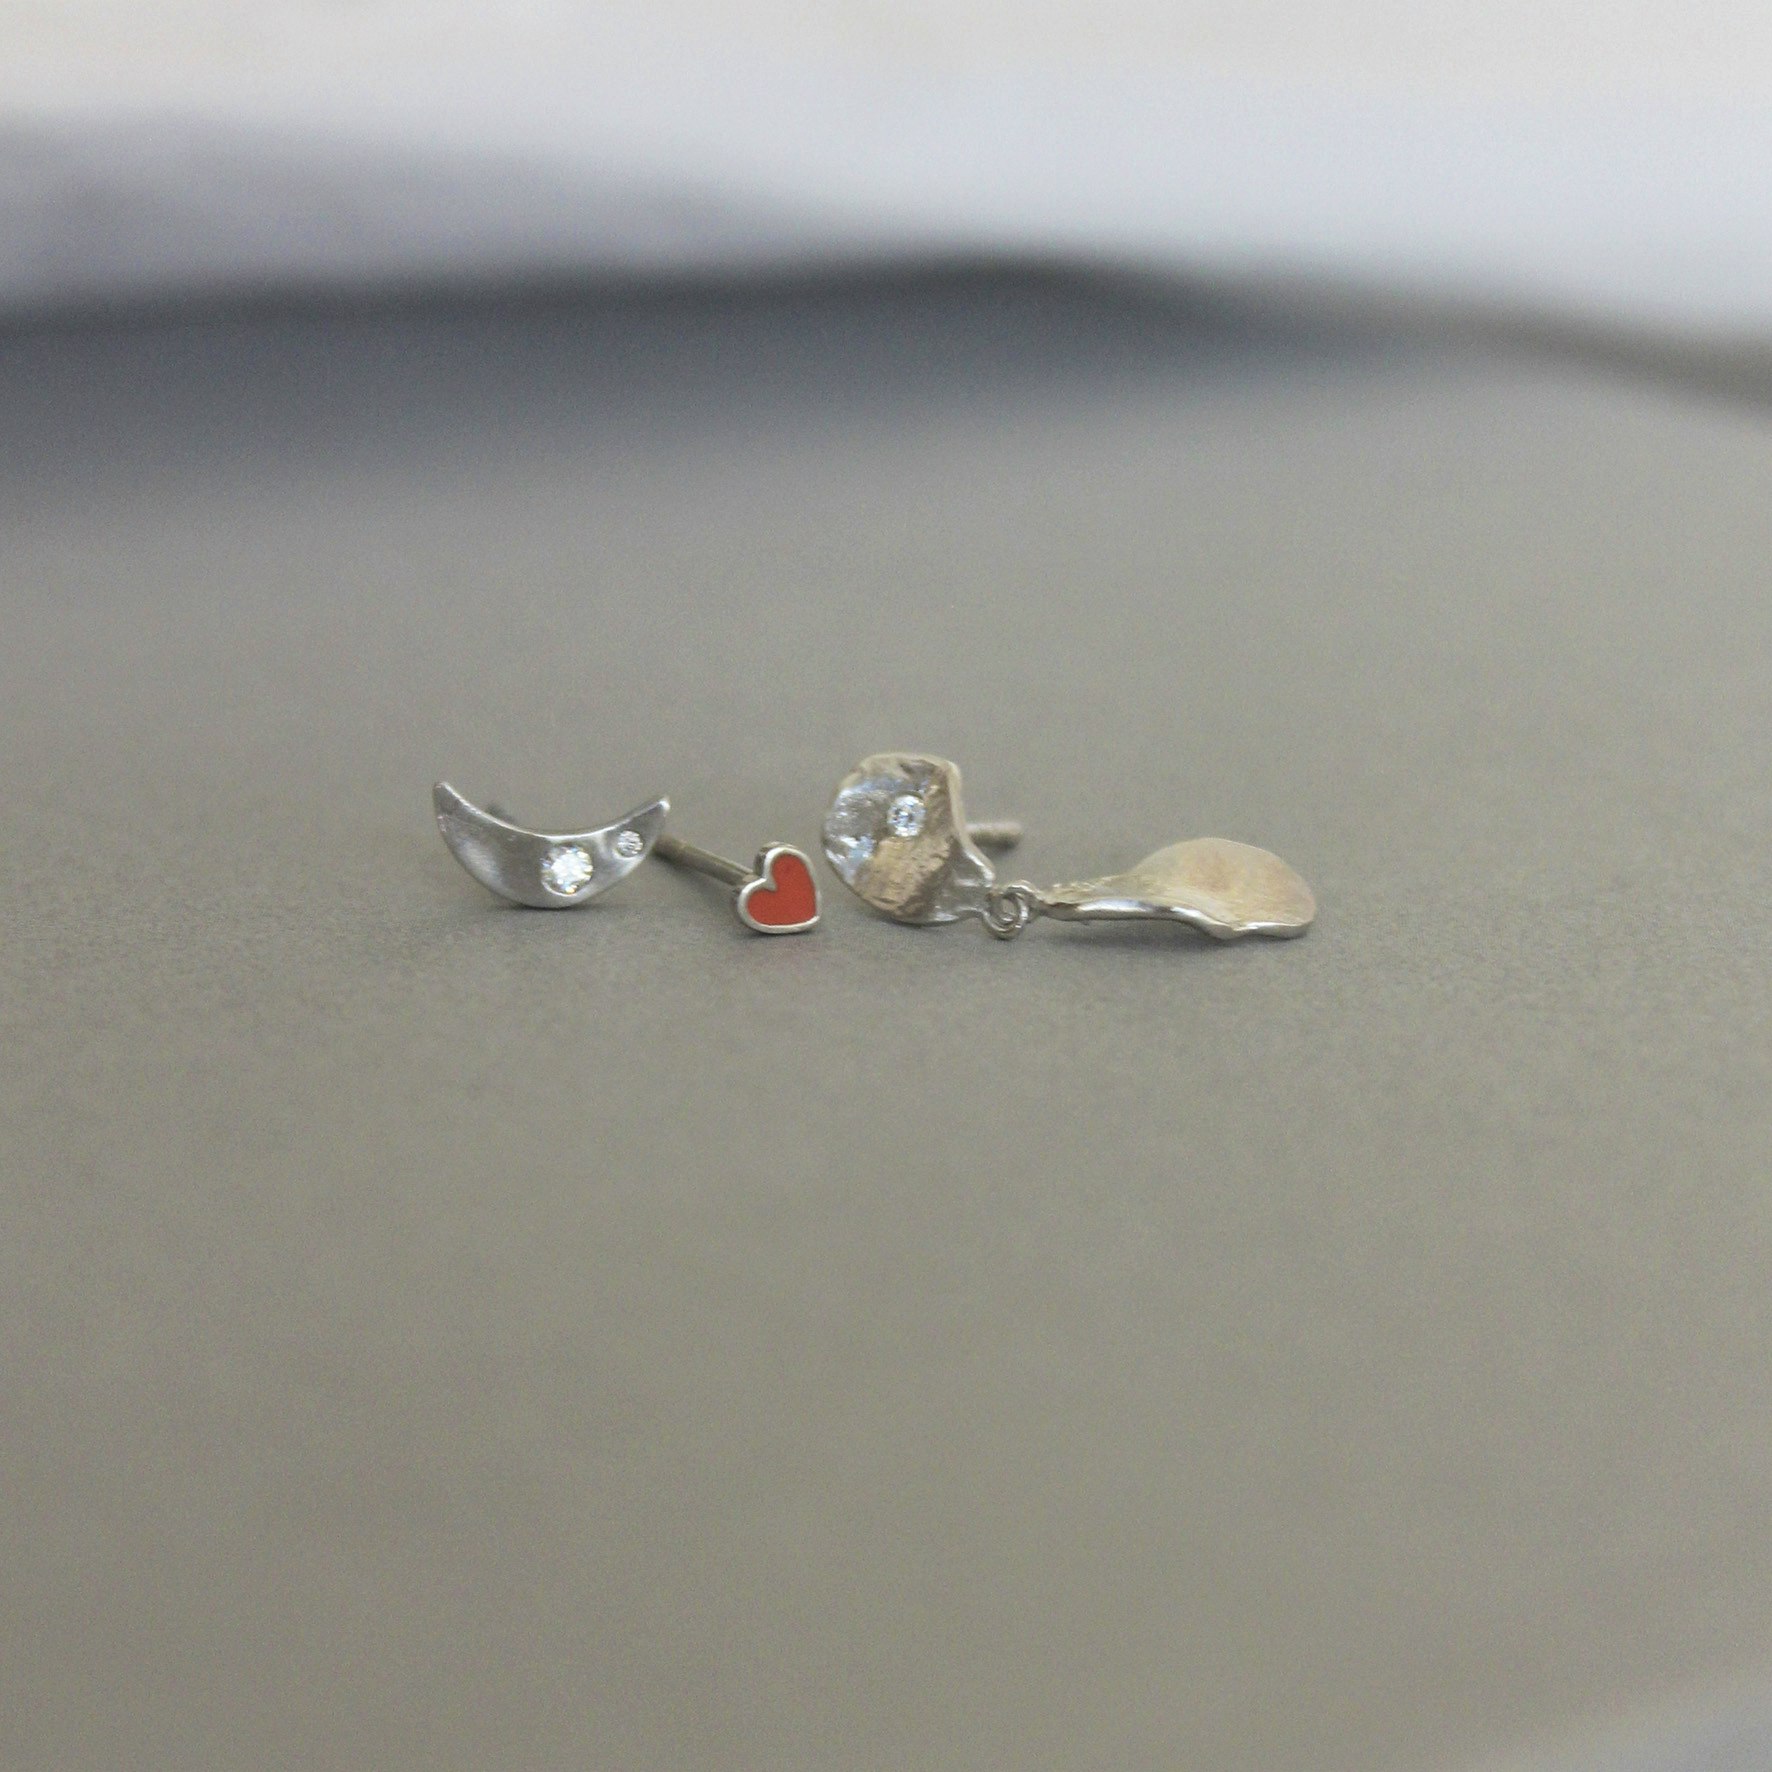 Clear Sea Earring With Stone from STINE A Jewelry in Goldplated-Silver Sterling 925